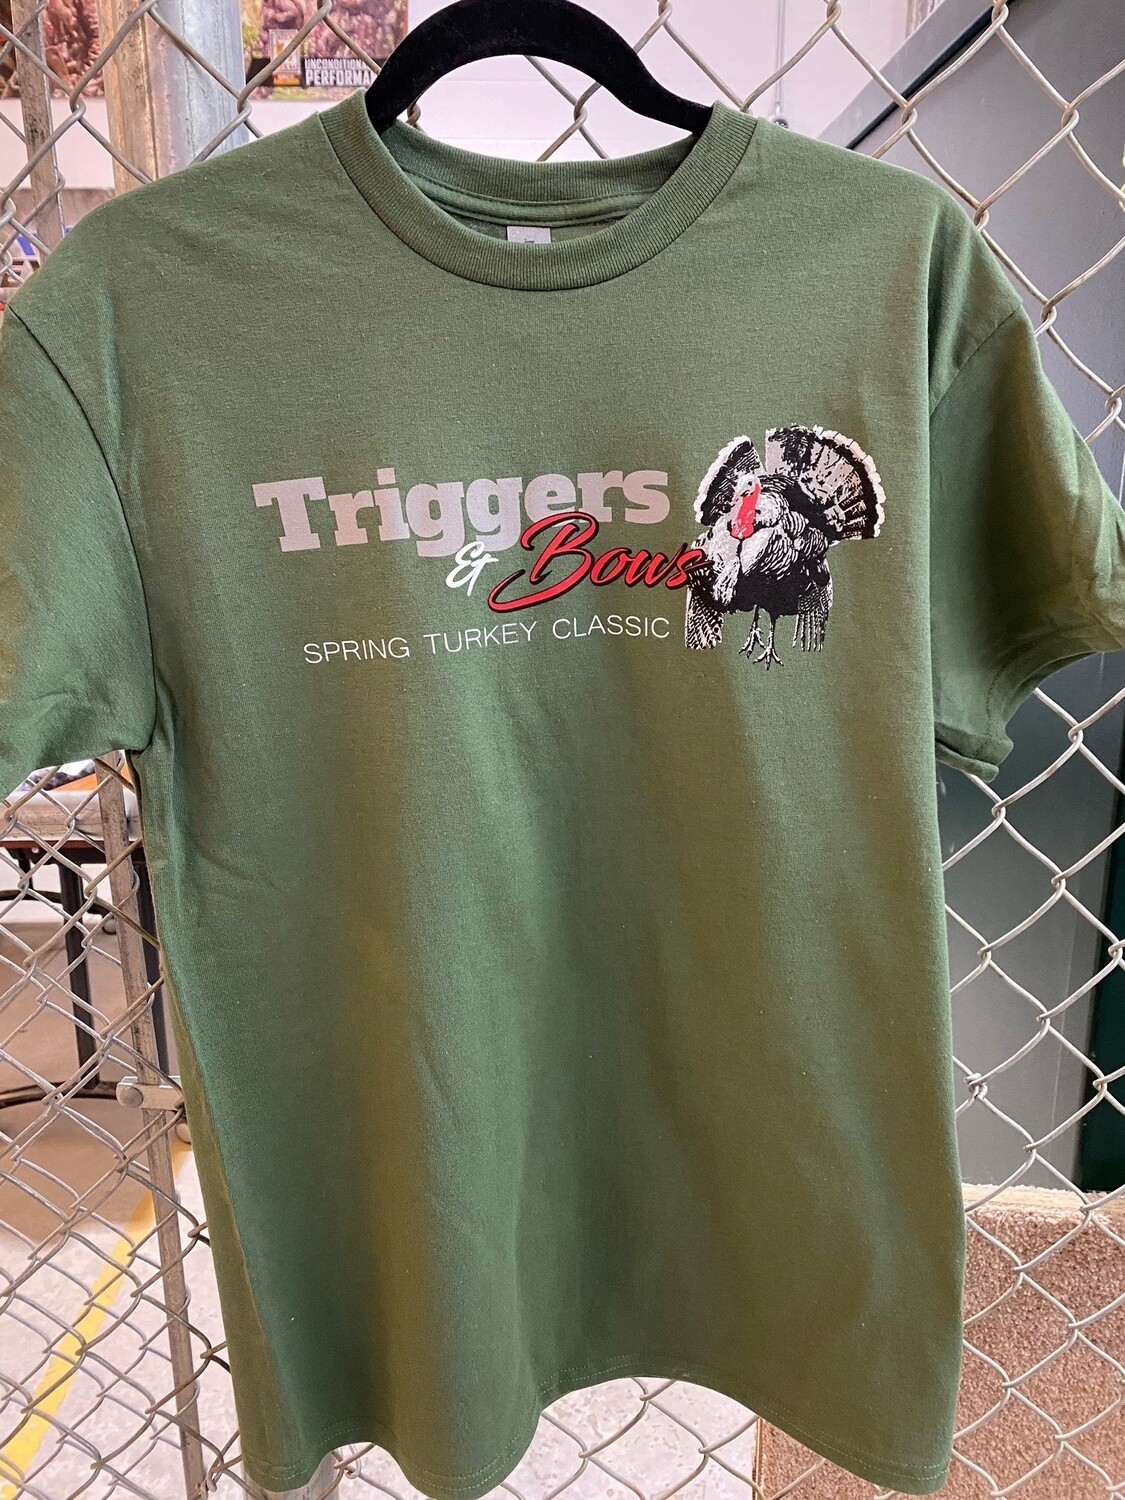 Triggers and Bows Spring Turkey Classic T-Shirt , Color: Military Green, Size: M